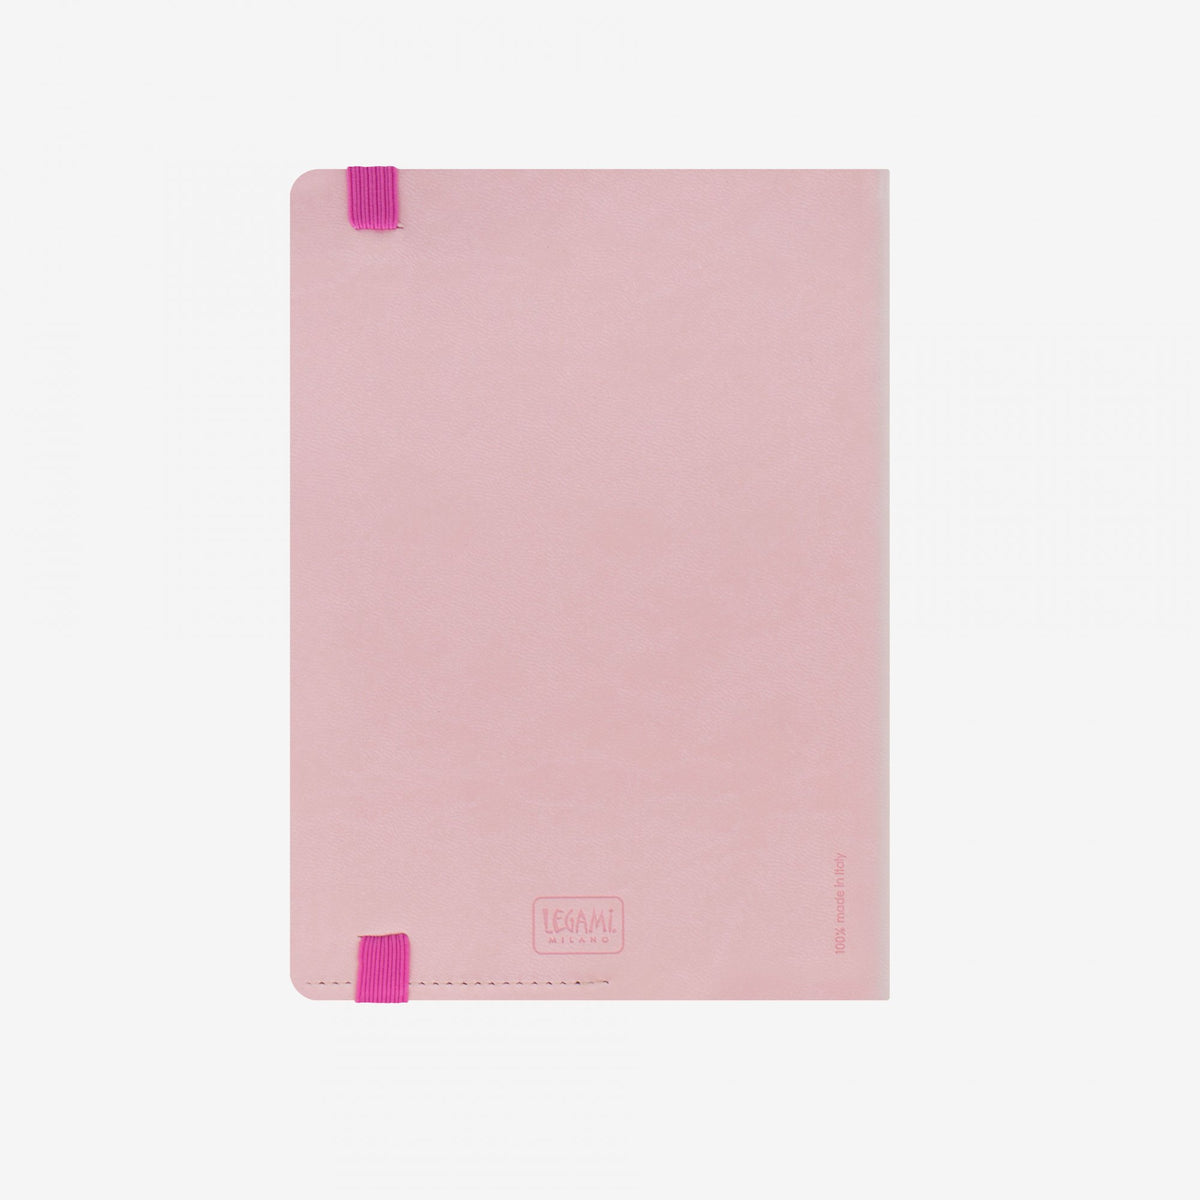 My notebook pink back legami gifts gift ideas gifting made simple